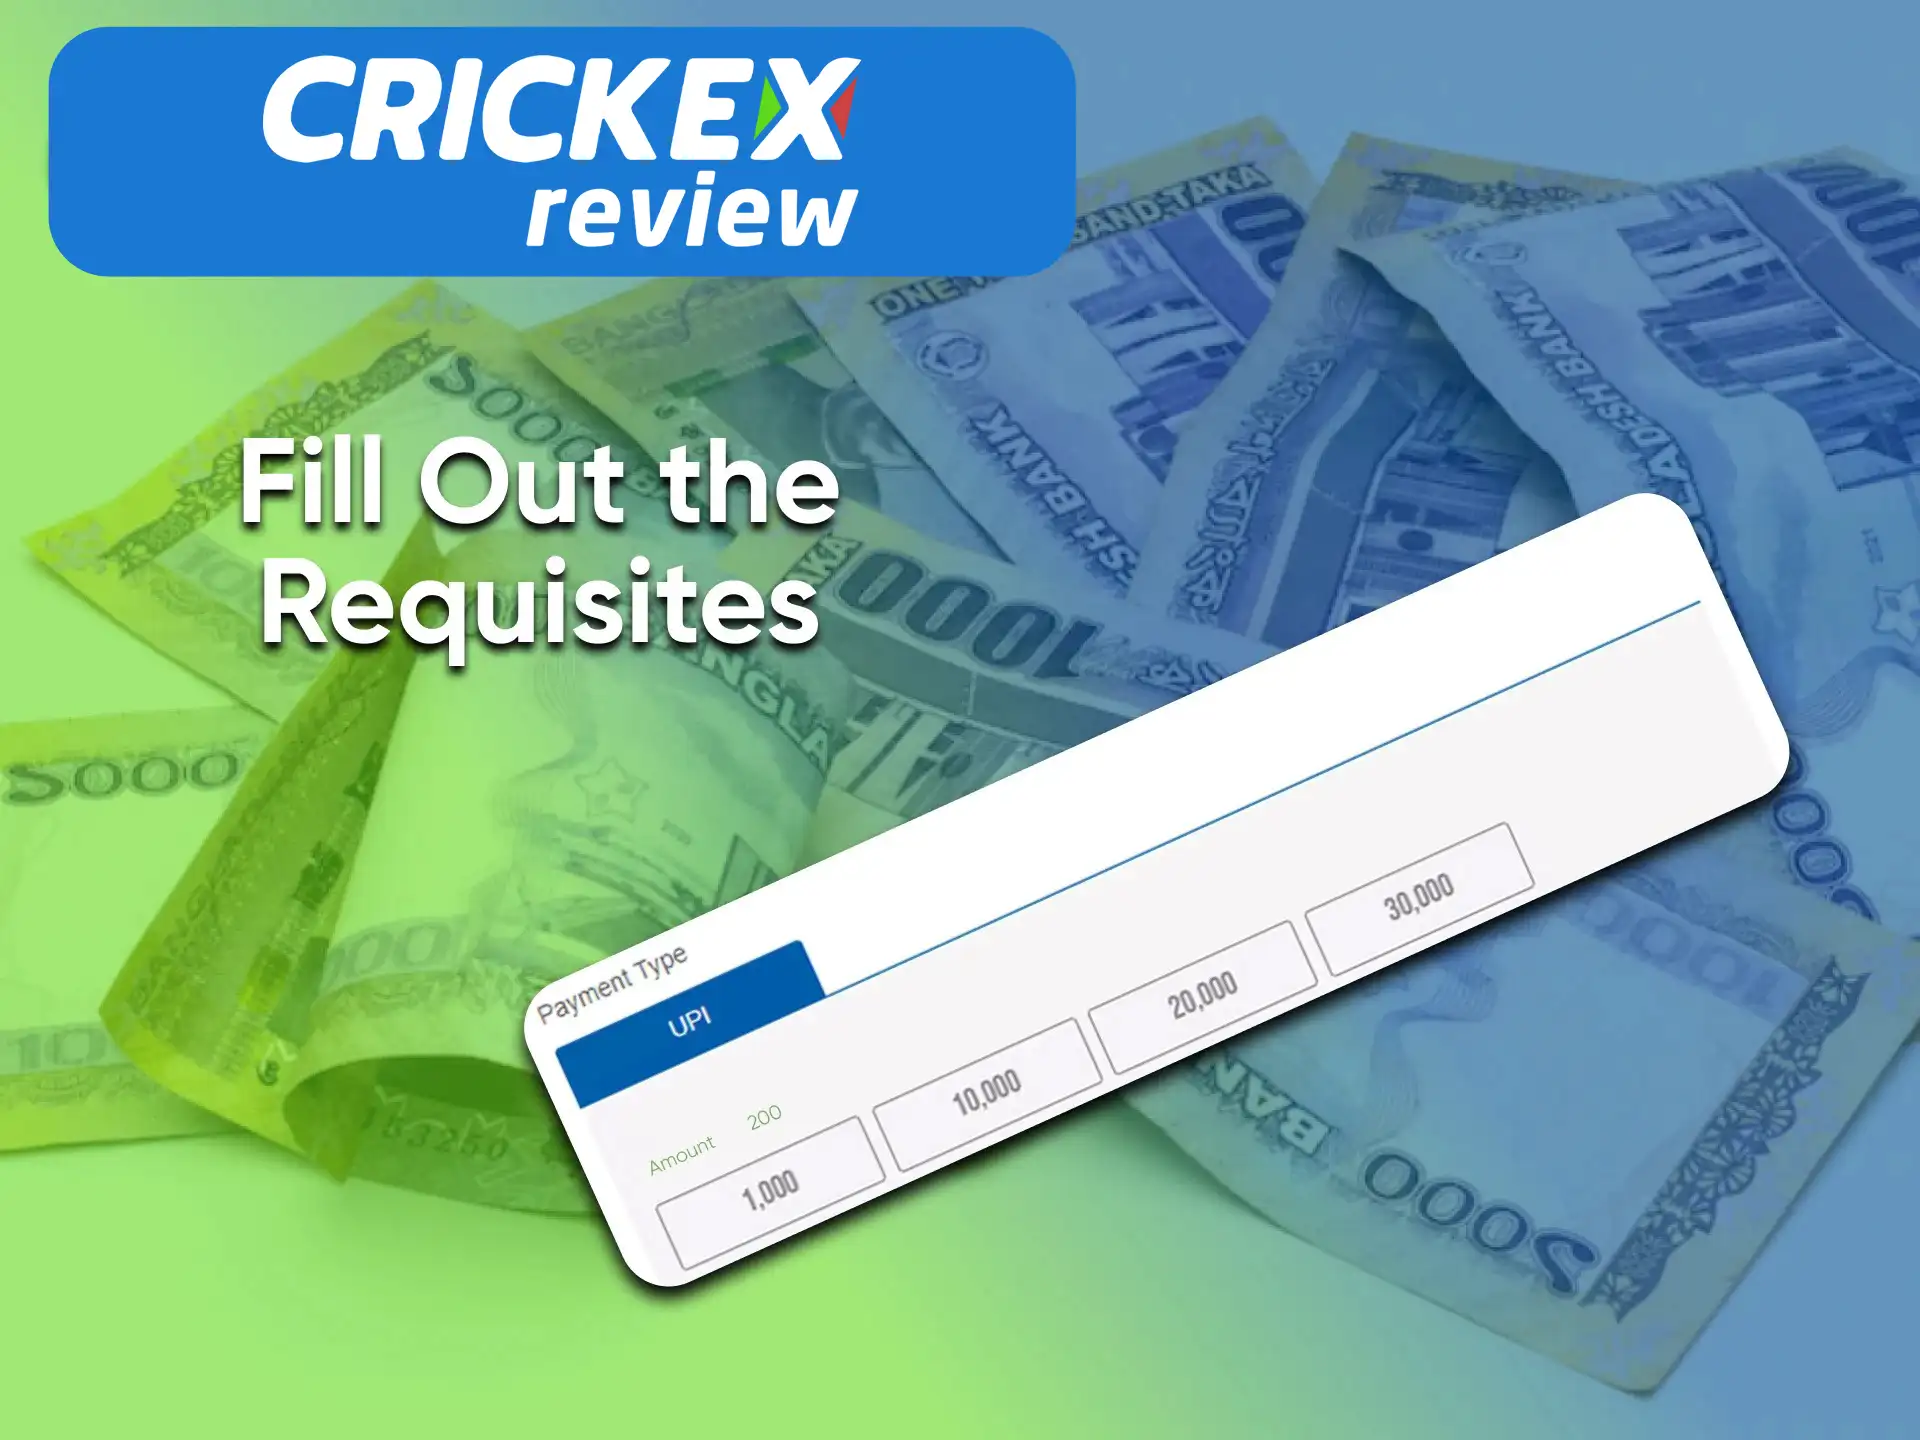 Enter the required details to complete the withdrawal from Crickex.